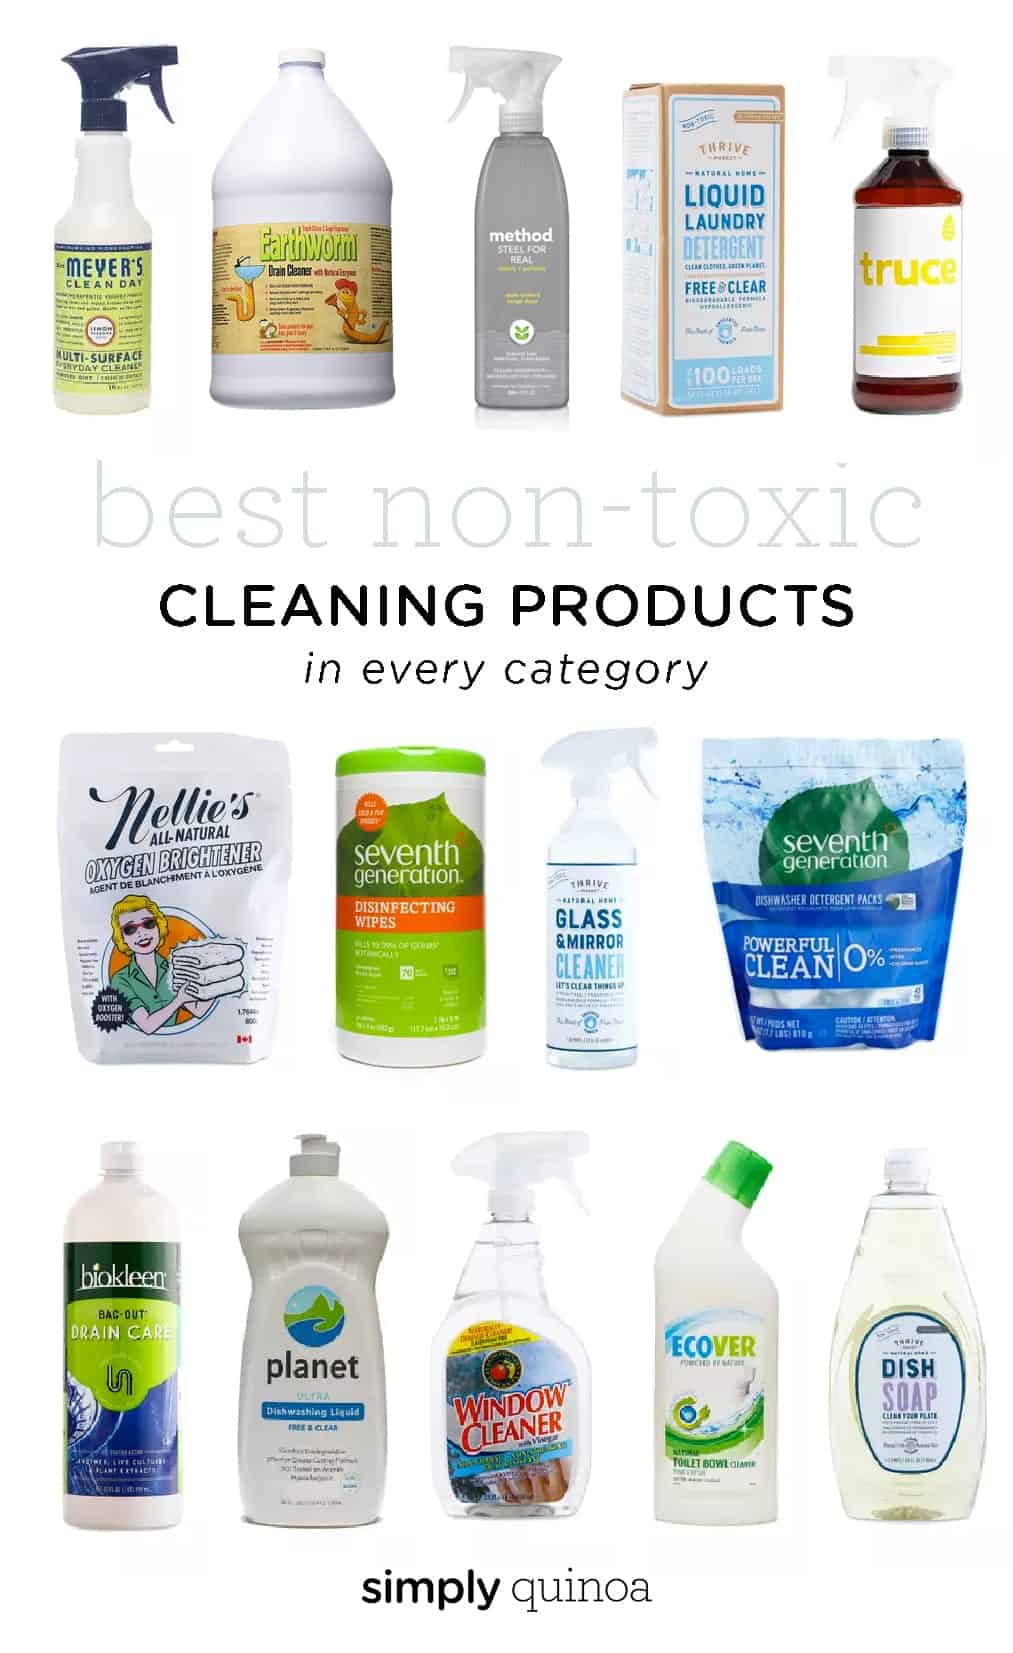 The Best Non-Toxic Cleaning Products in 